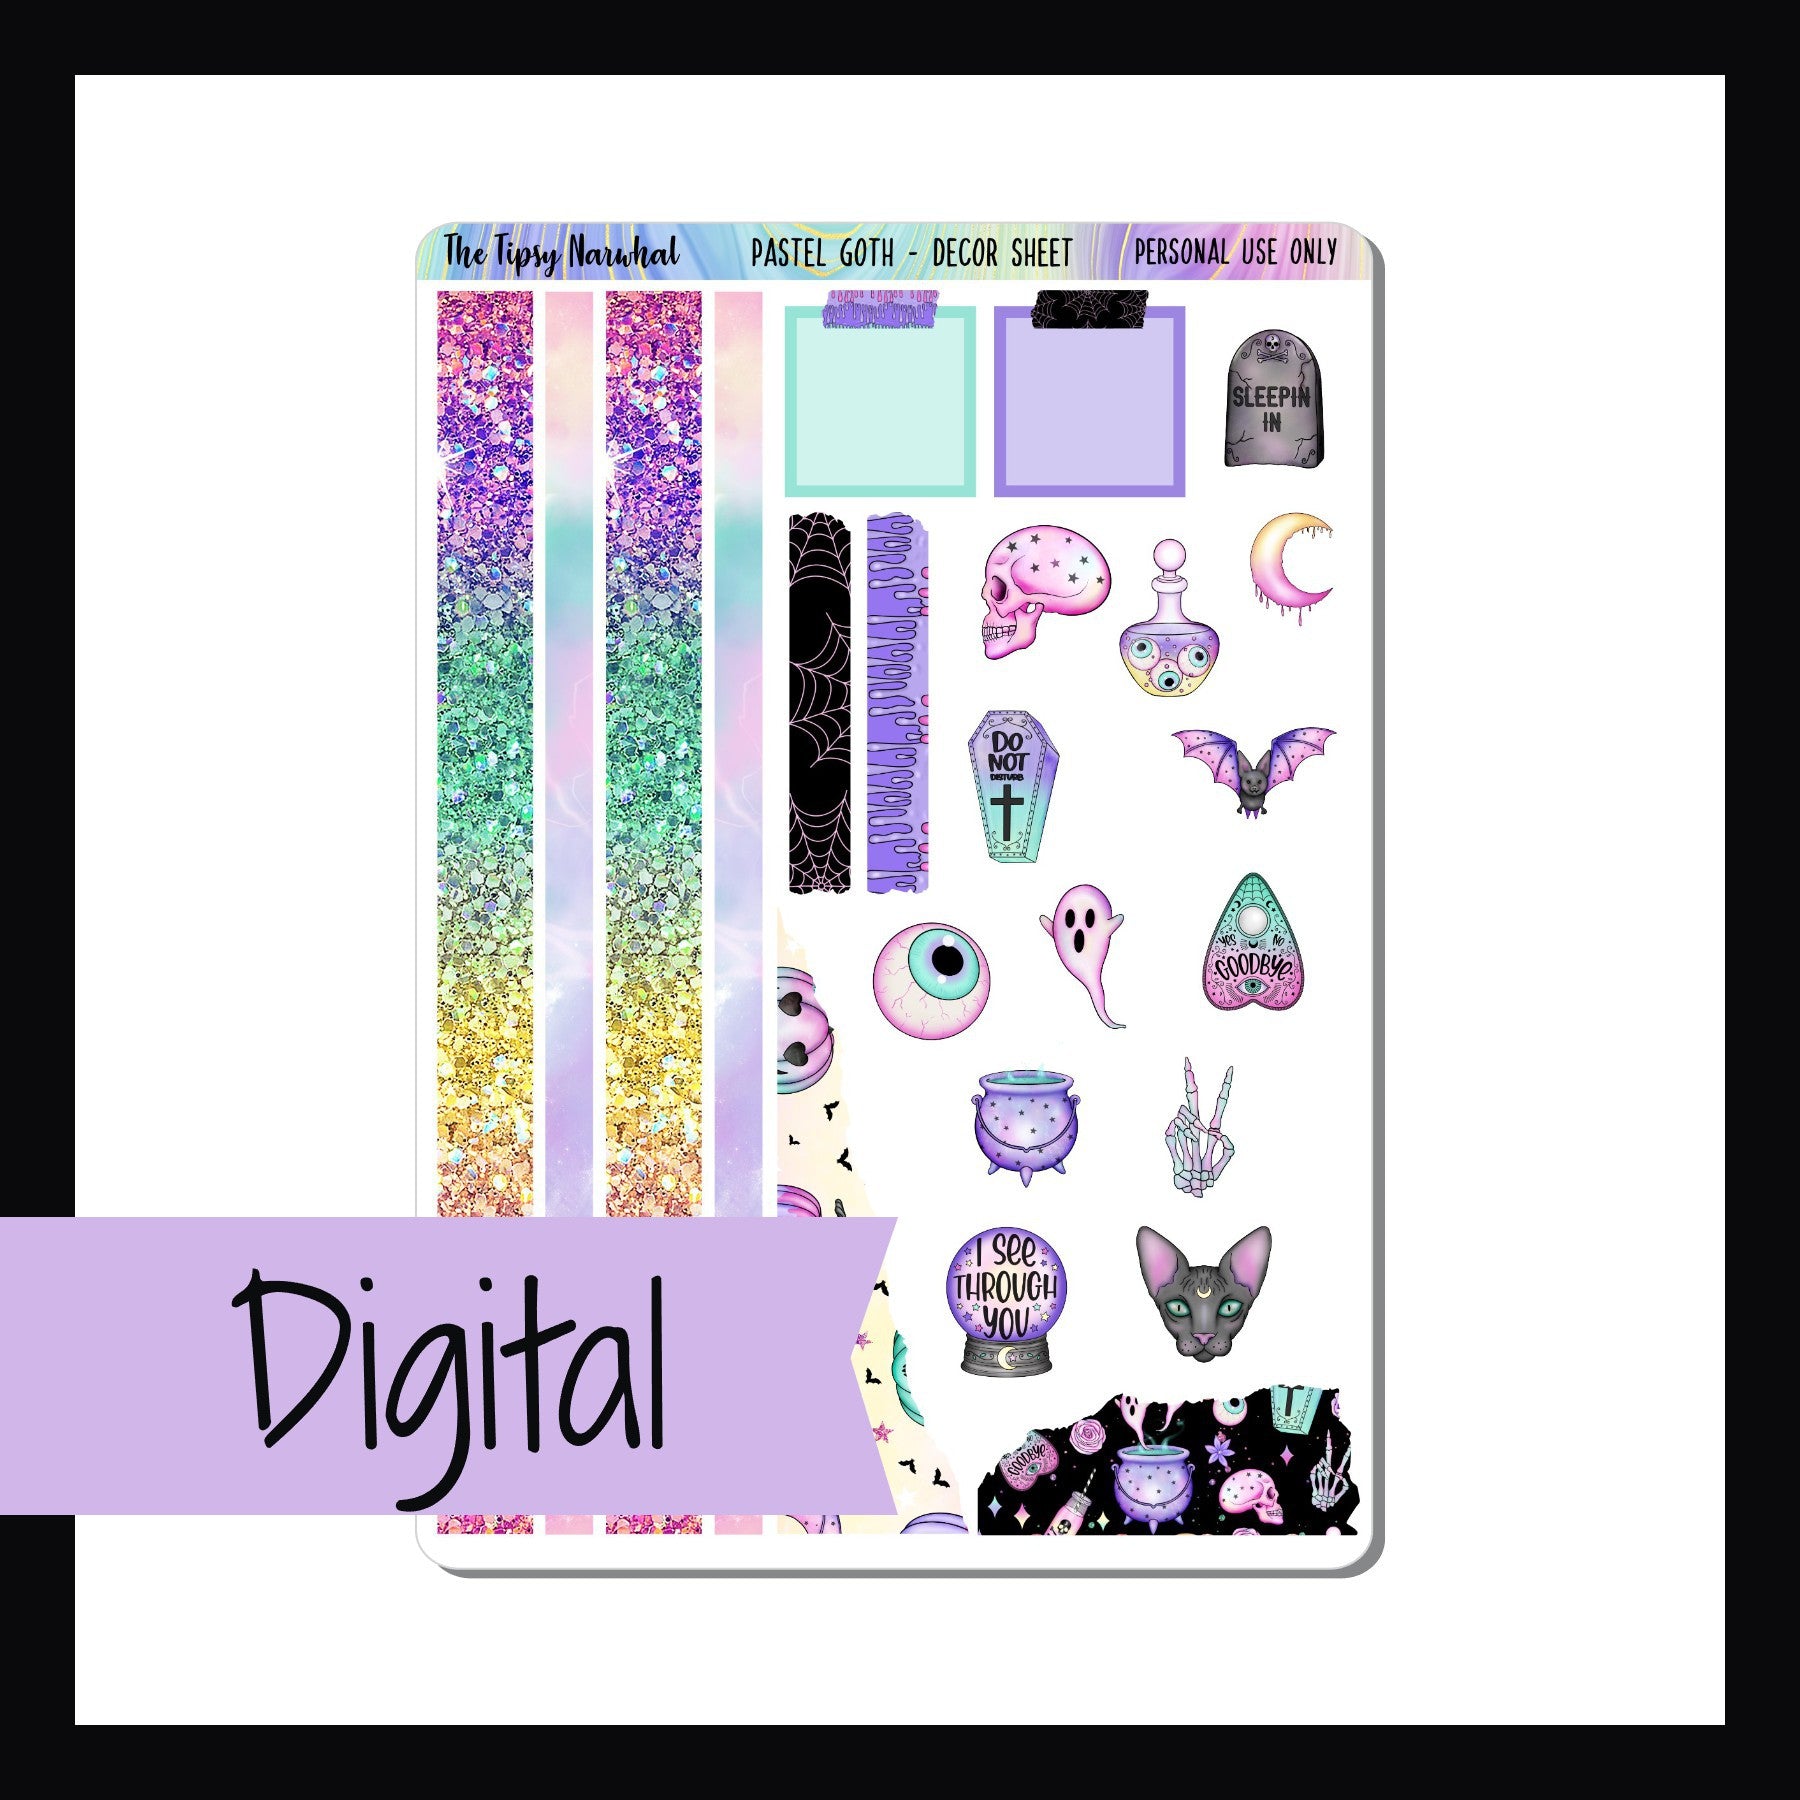 Digital Pastel Goth Decor Sheet is a digital/printable version of the Pastel Goth decor sheet.   The sheet features multiple spooky goth stickers mixed with soft pastel colors. 